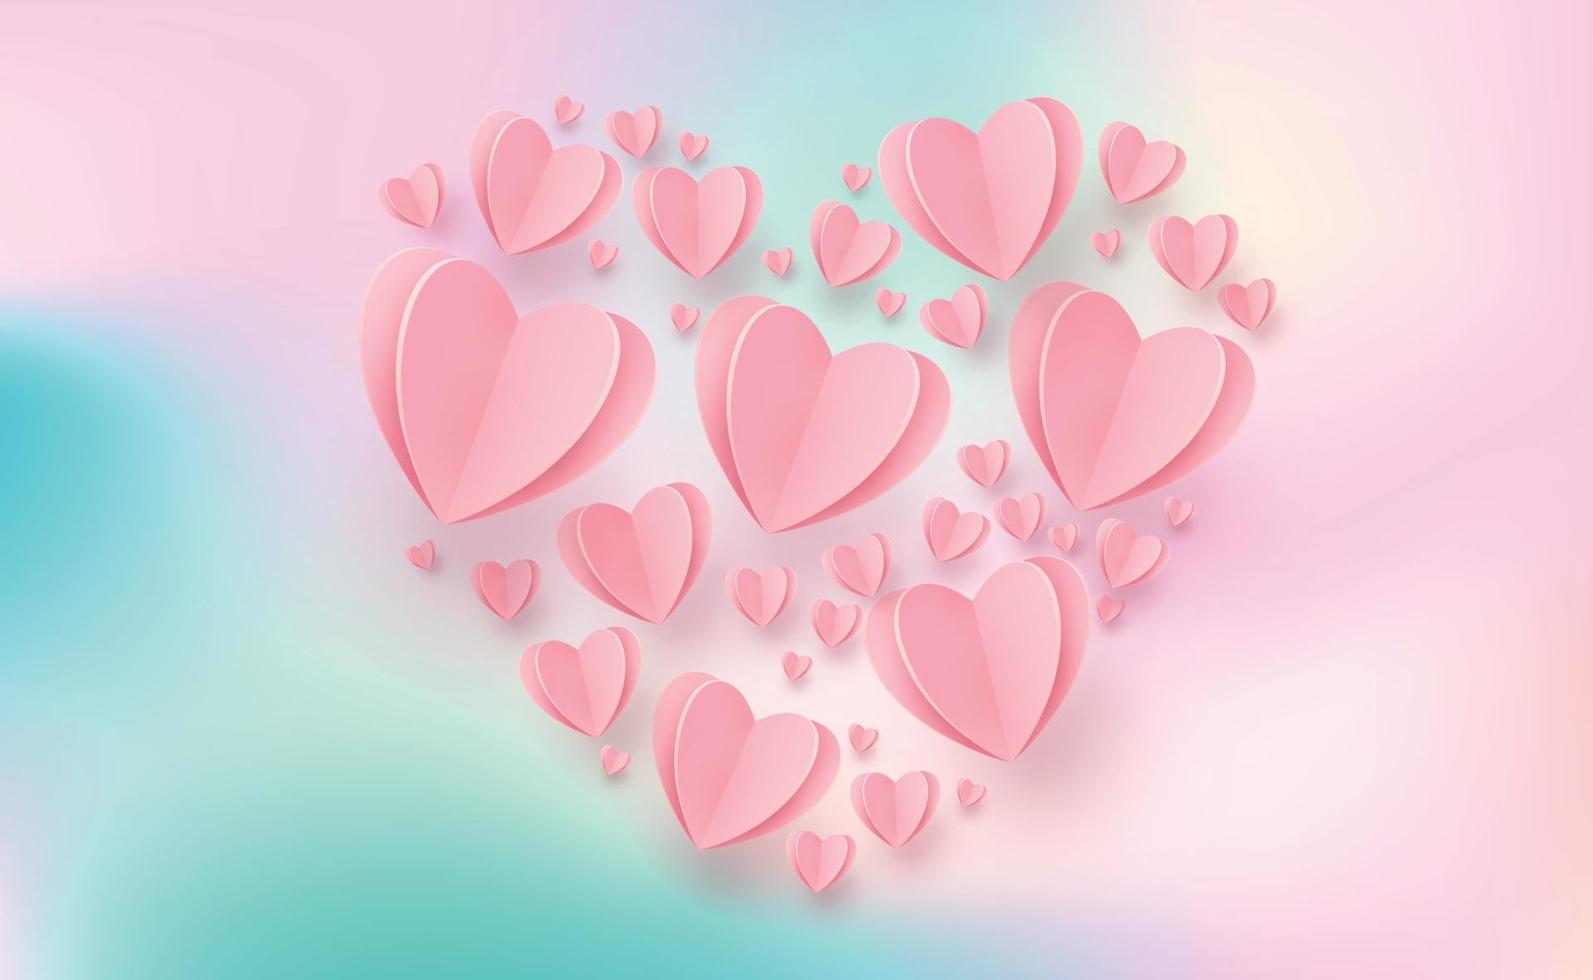 Gentle pink-red hearts on a colorful background - illustration vector